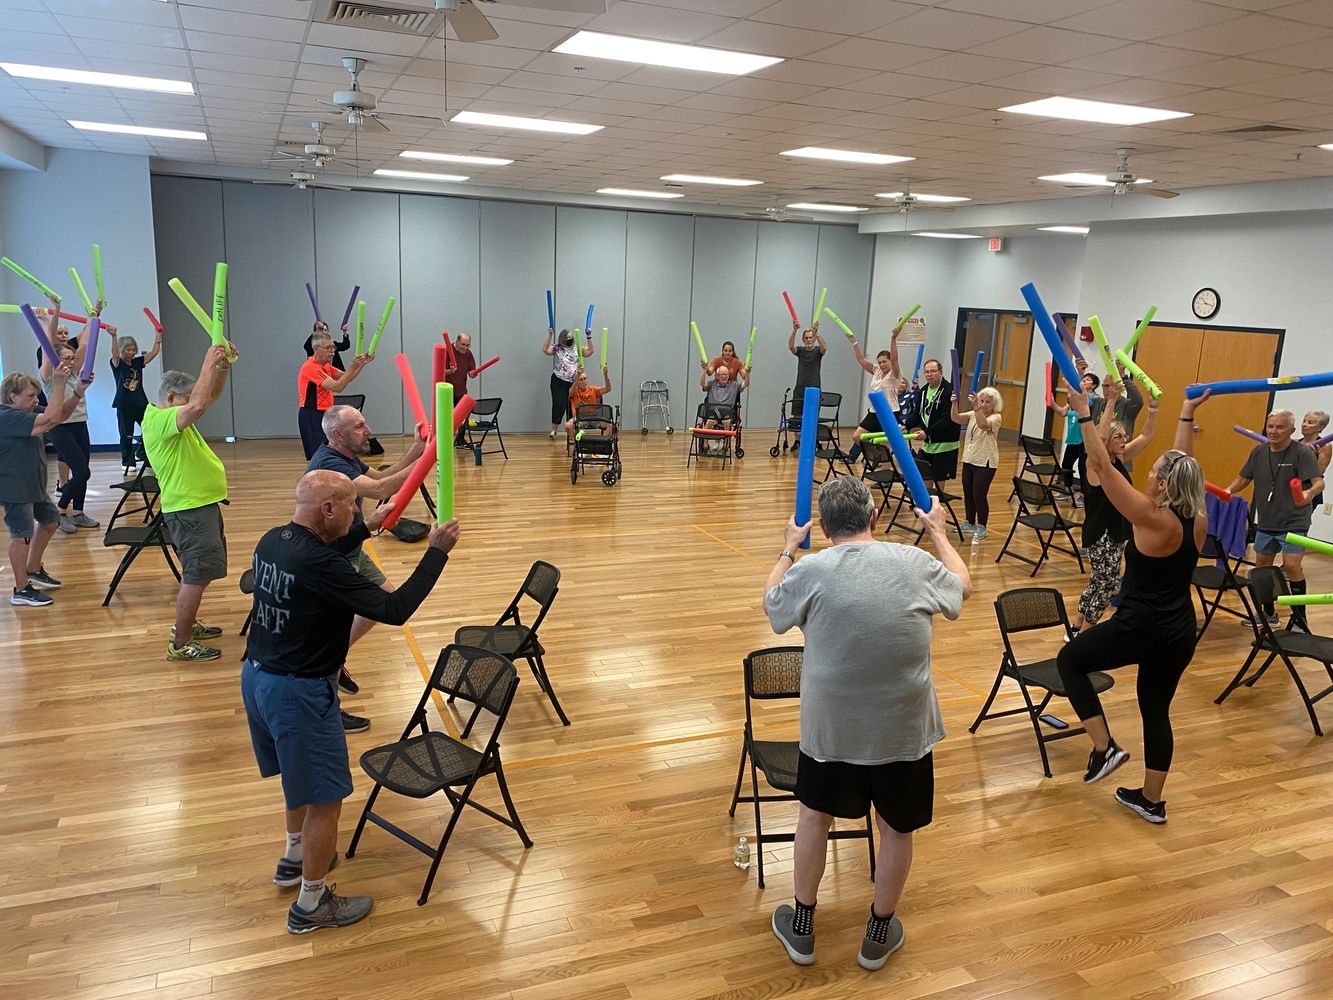 pdLIFE Parkinson's exercise class. We provide free Parkinson's exercise classes in greater Tampa Bay